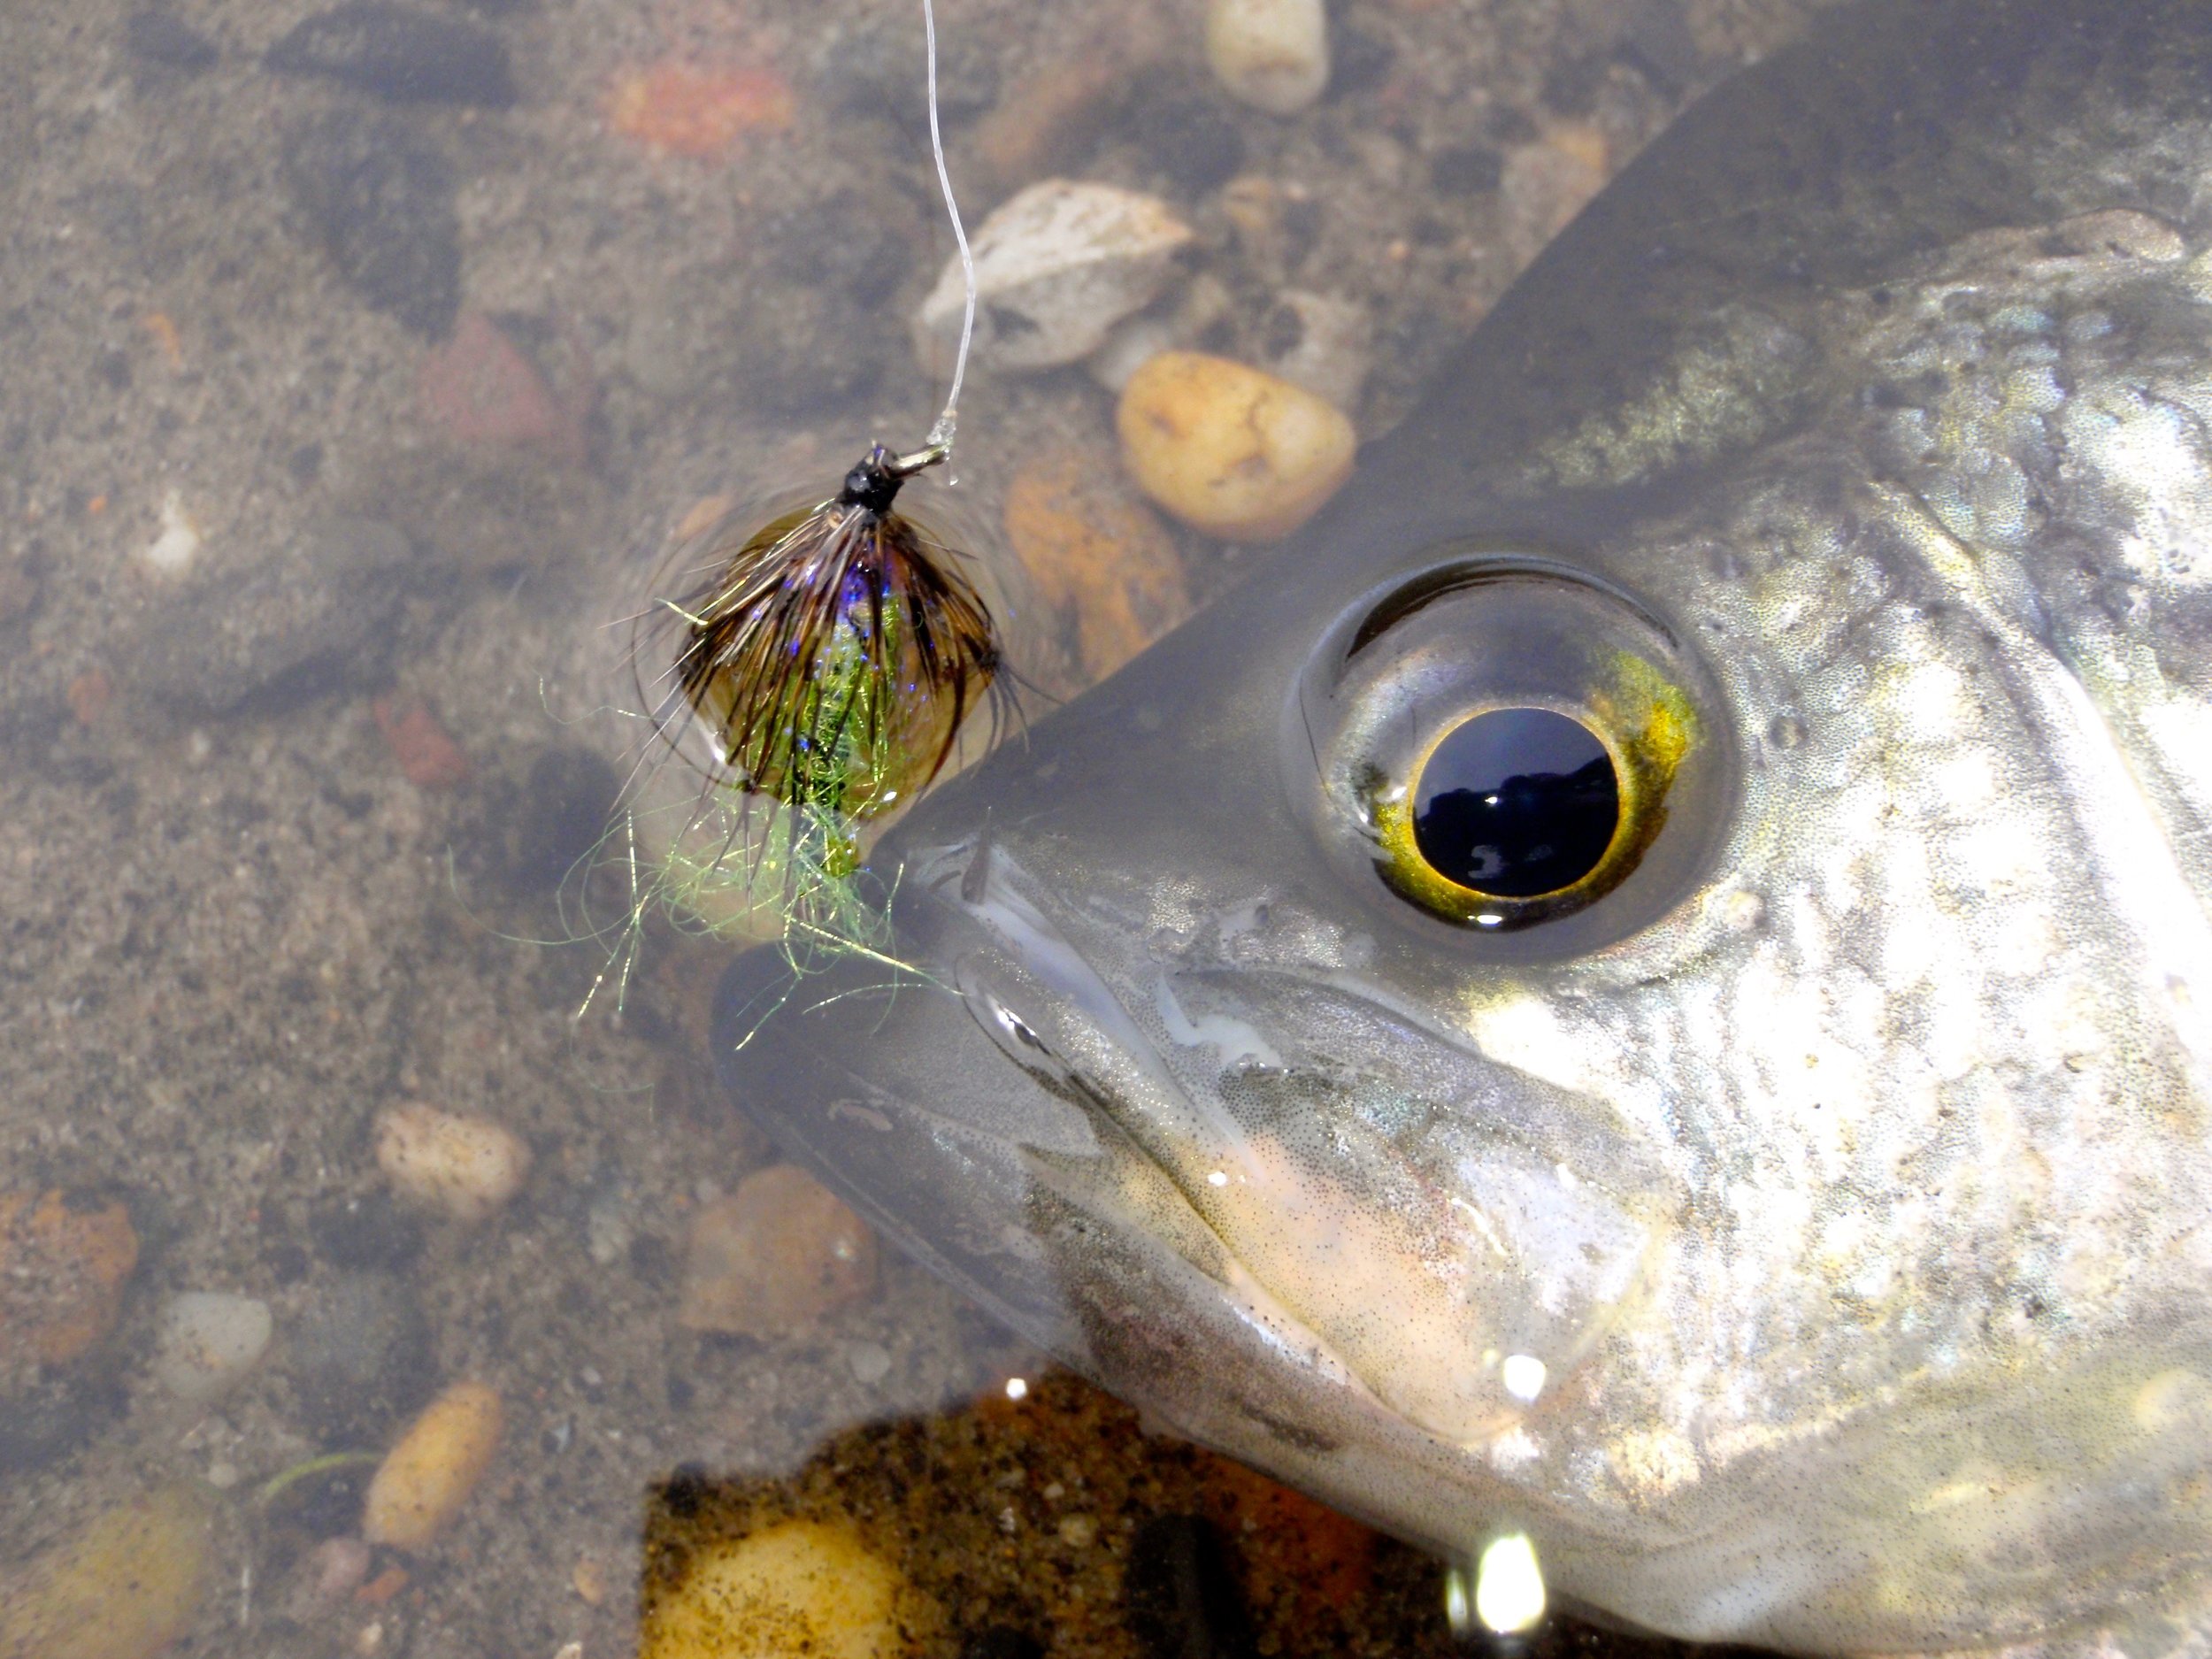 Fly Fishing for Crappie - Crappie Now